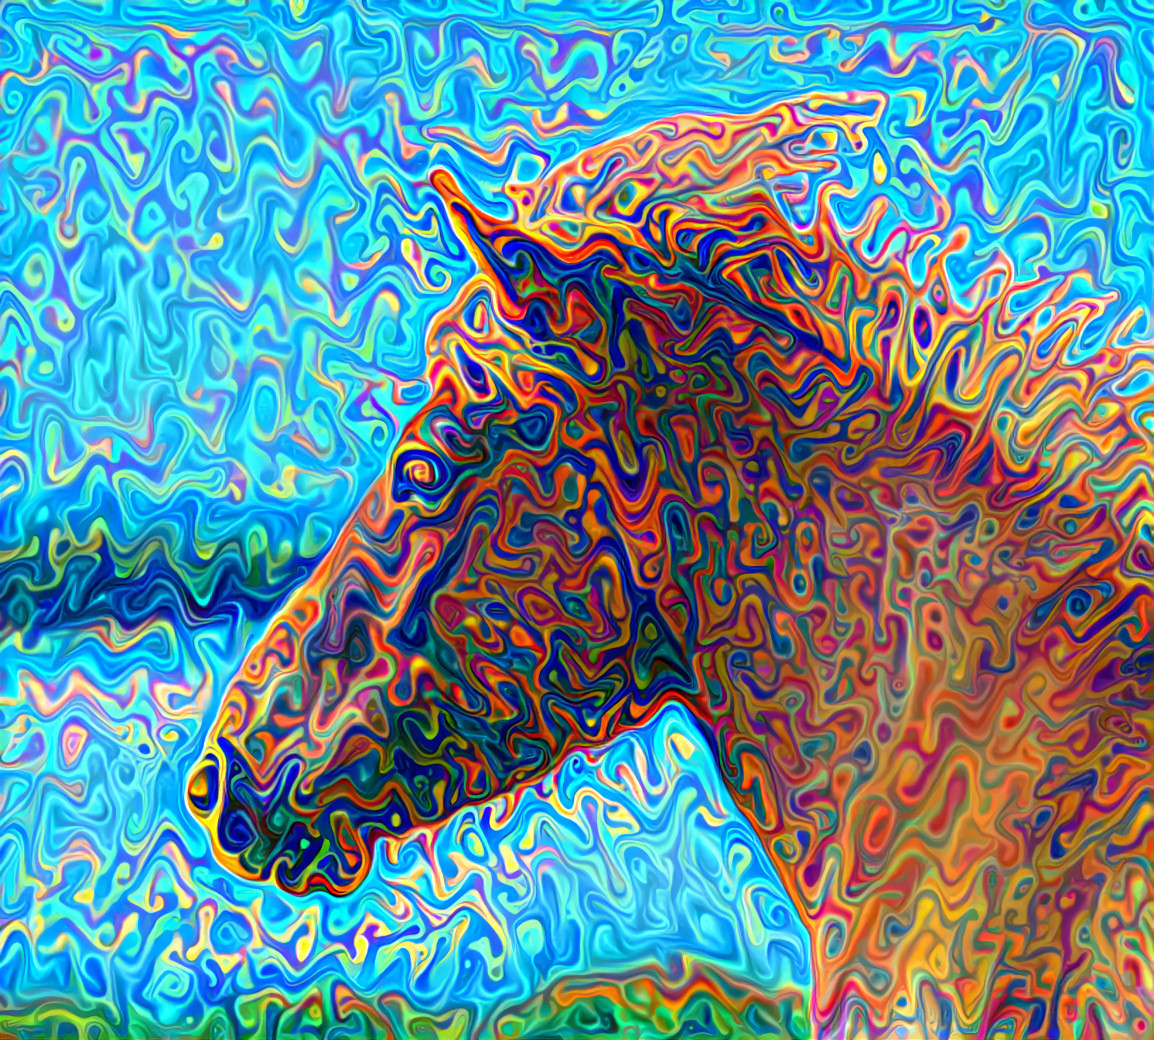 Psychedelic Horse - Style by Daniel W. Prust